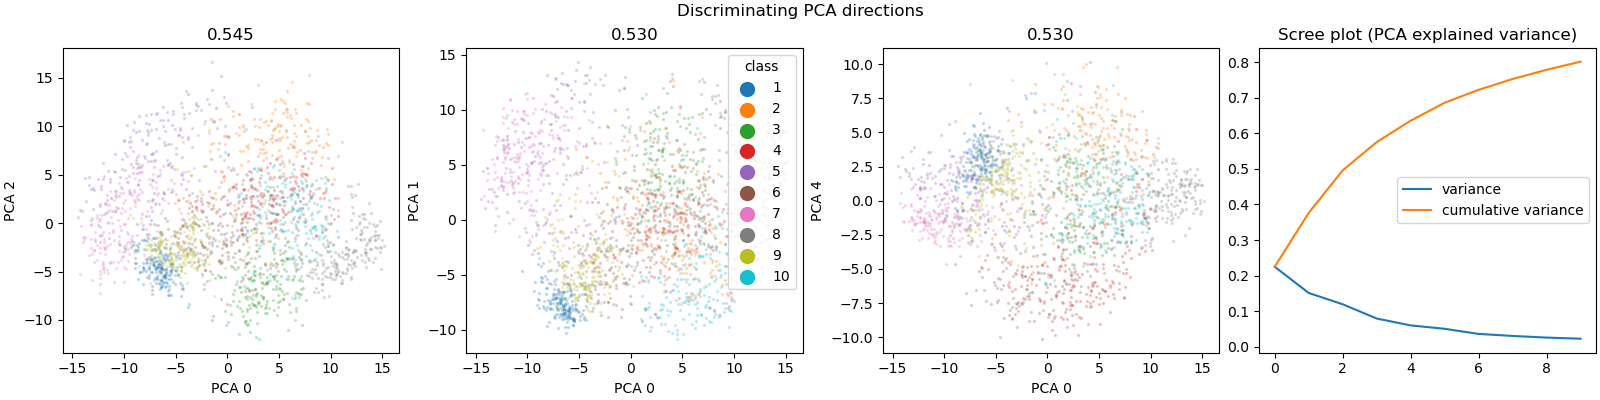 Discriminating PCA directions, 0.545, 0.530, 0.530, Scree plot (PCA explained variance)